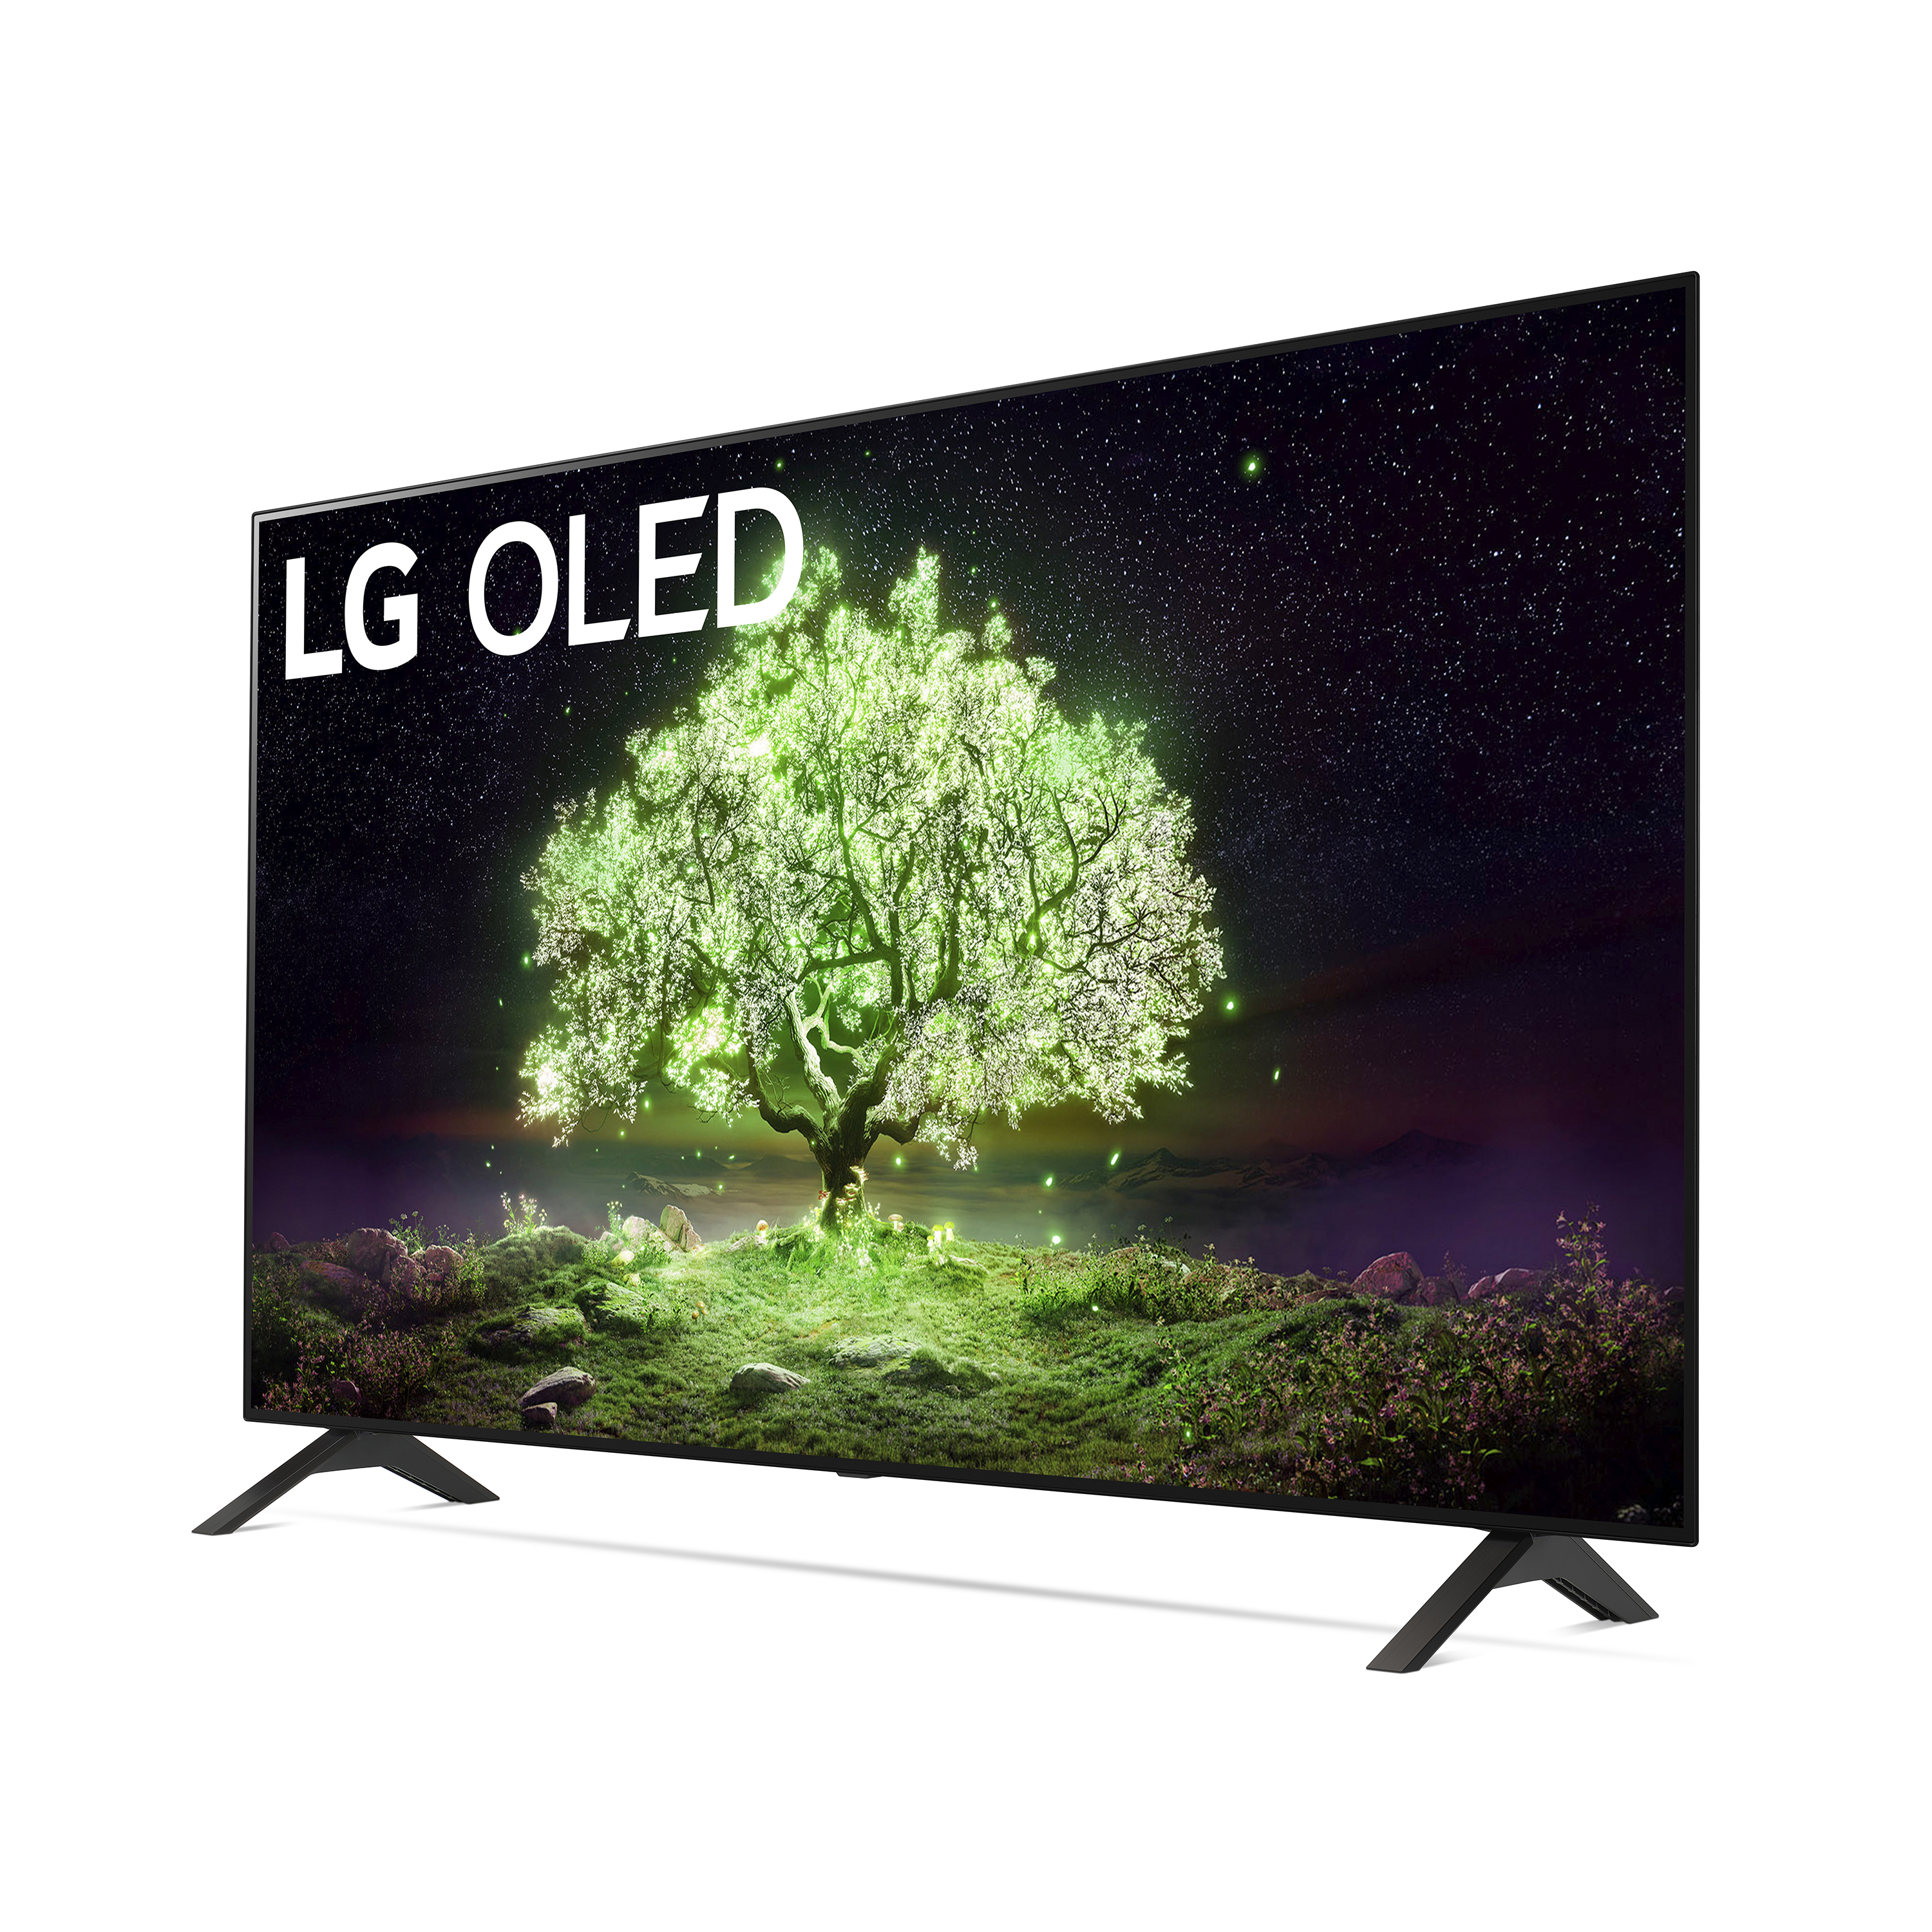 LG 48" Class 4K UHD 2160P OLED Smart TV with HDR, OLED48A1PUA - image 19 of 25